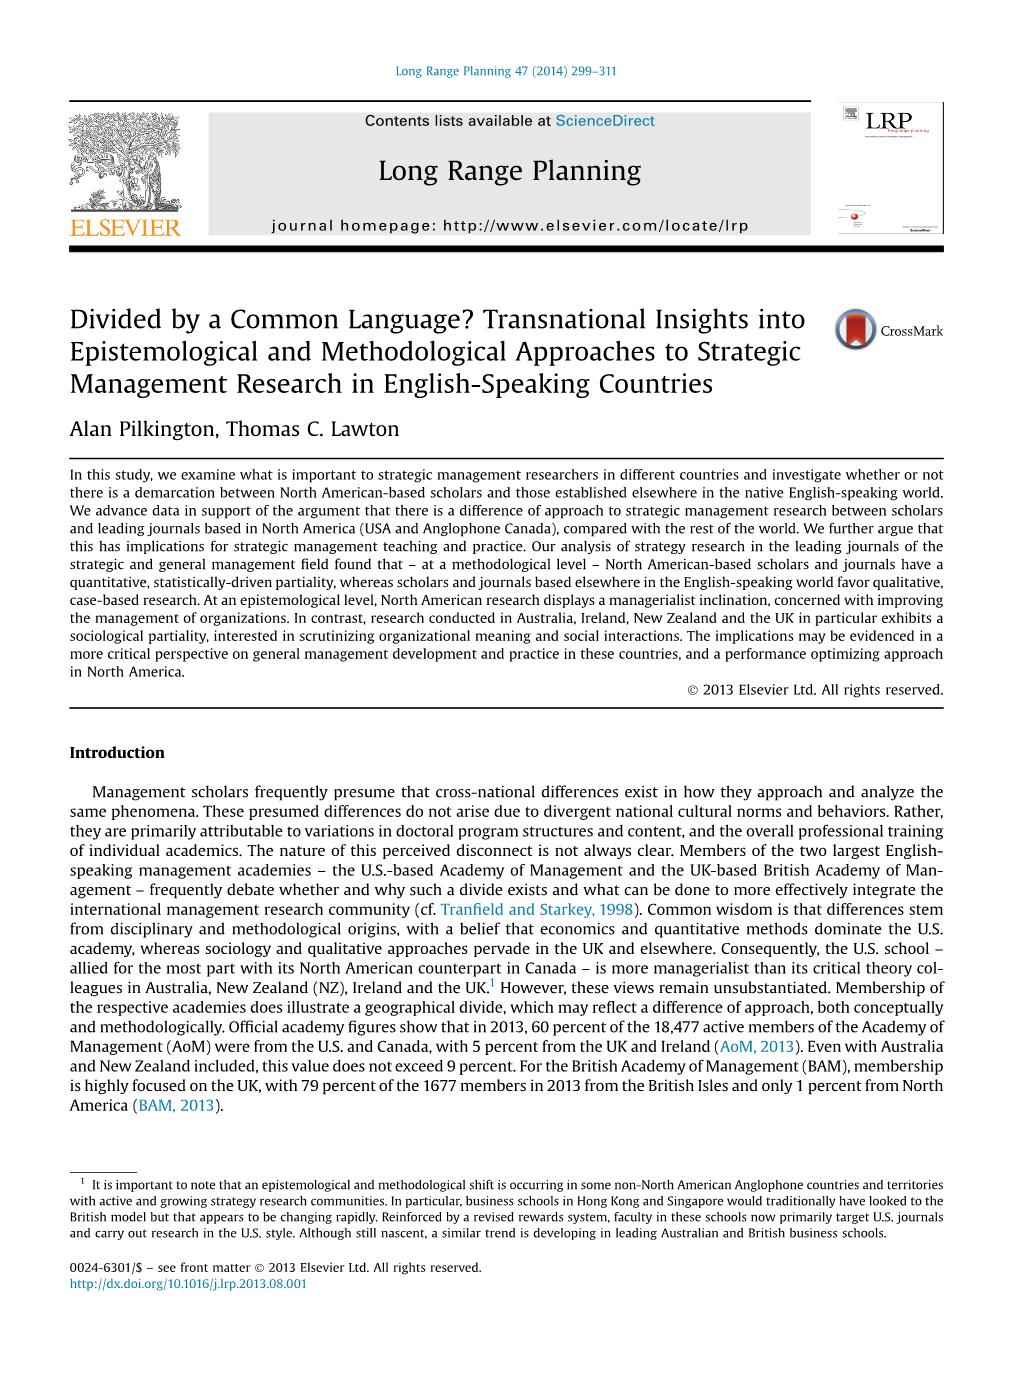 Transnational Insights Into Epistemological and Methodological Approaches to Strategic Management Research in English-Speaking Countries